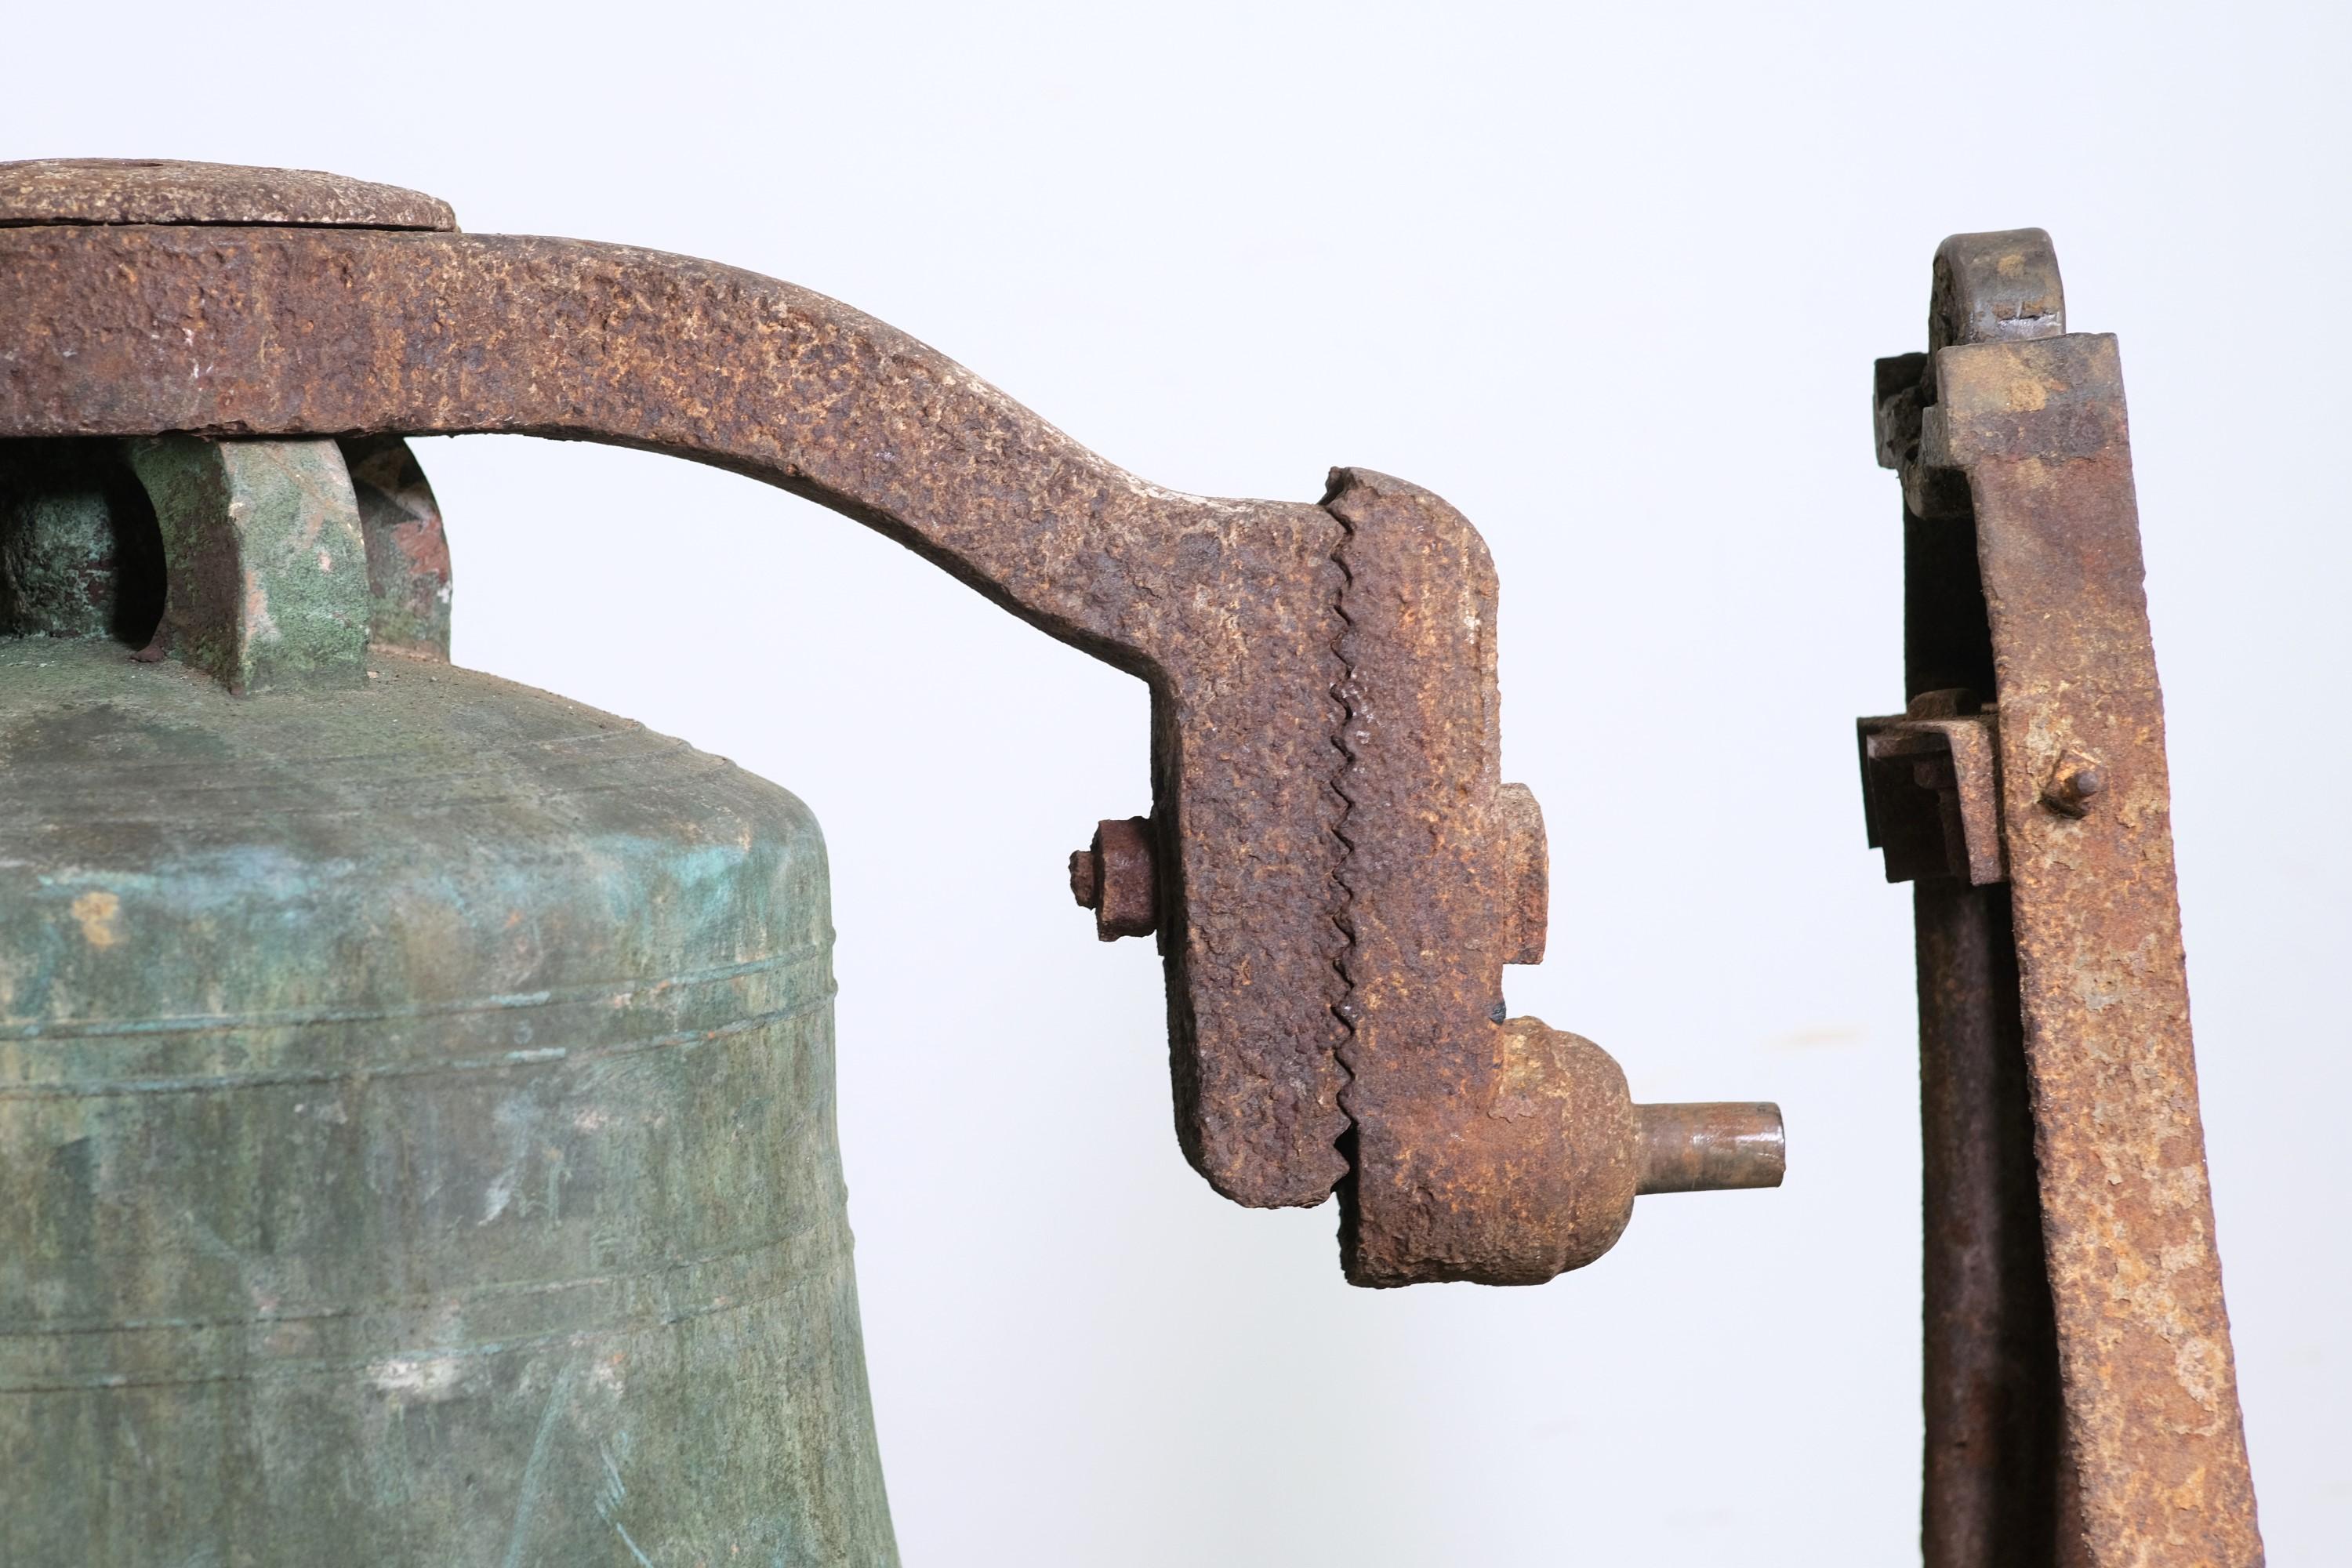 Solid bronze verdigris patina mid 1800s church bell with a cast iron bracket and base. This is in good condition with no cracks except in the iron bracket. This is stamped Meneely's West Troy N.Y 1855. Please note, this item is located in our